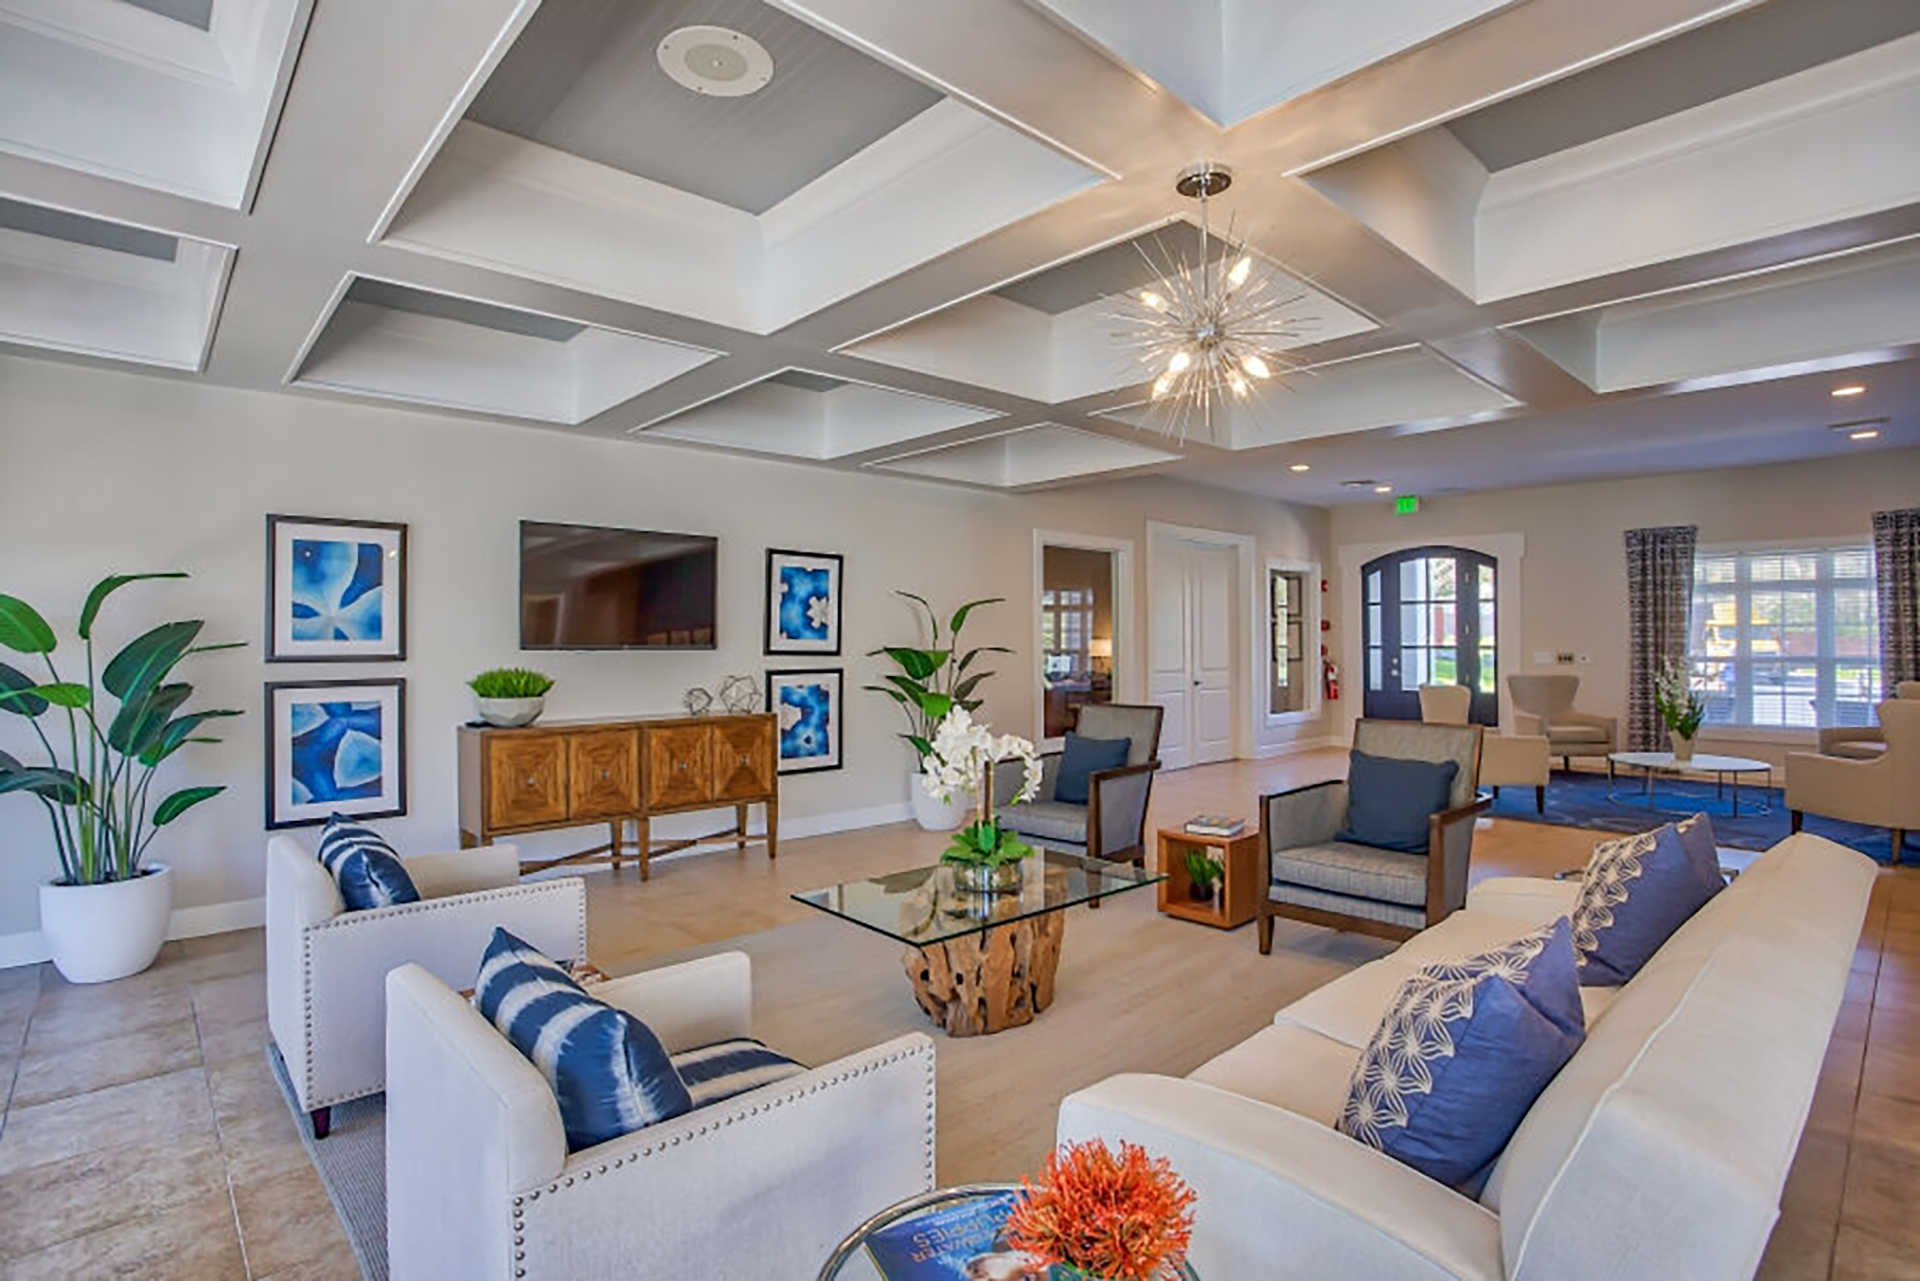 A modern living room with coffered ceiling in a multi-family real estate investment property. Cream-colored sofas, a glass coffee table, and a large TV. Blue accents in pillows and artwork, along with potted plants and a geometric chandelier, enhance the decor.